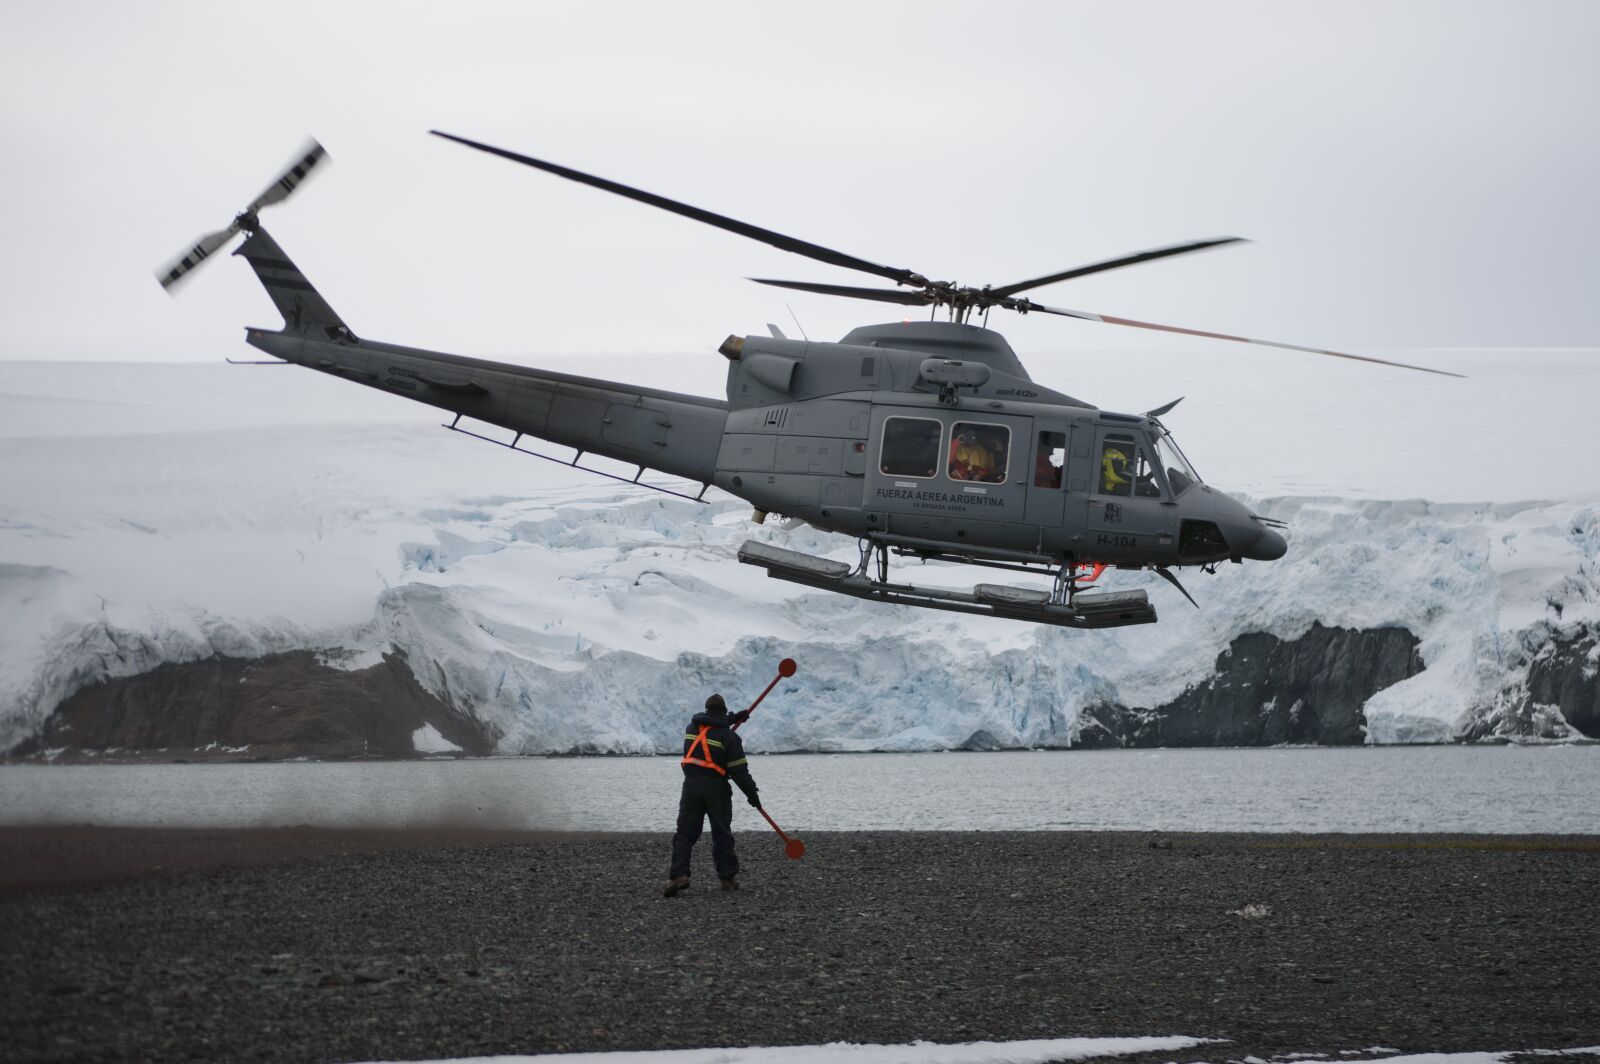 Nikon D3200 sample photo. "Helicopter, directing, glacier" photography